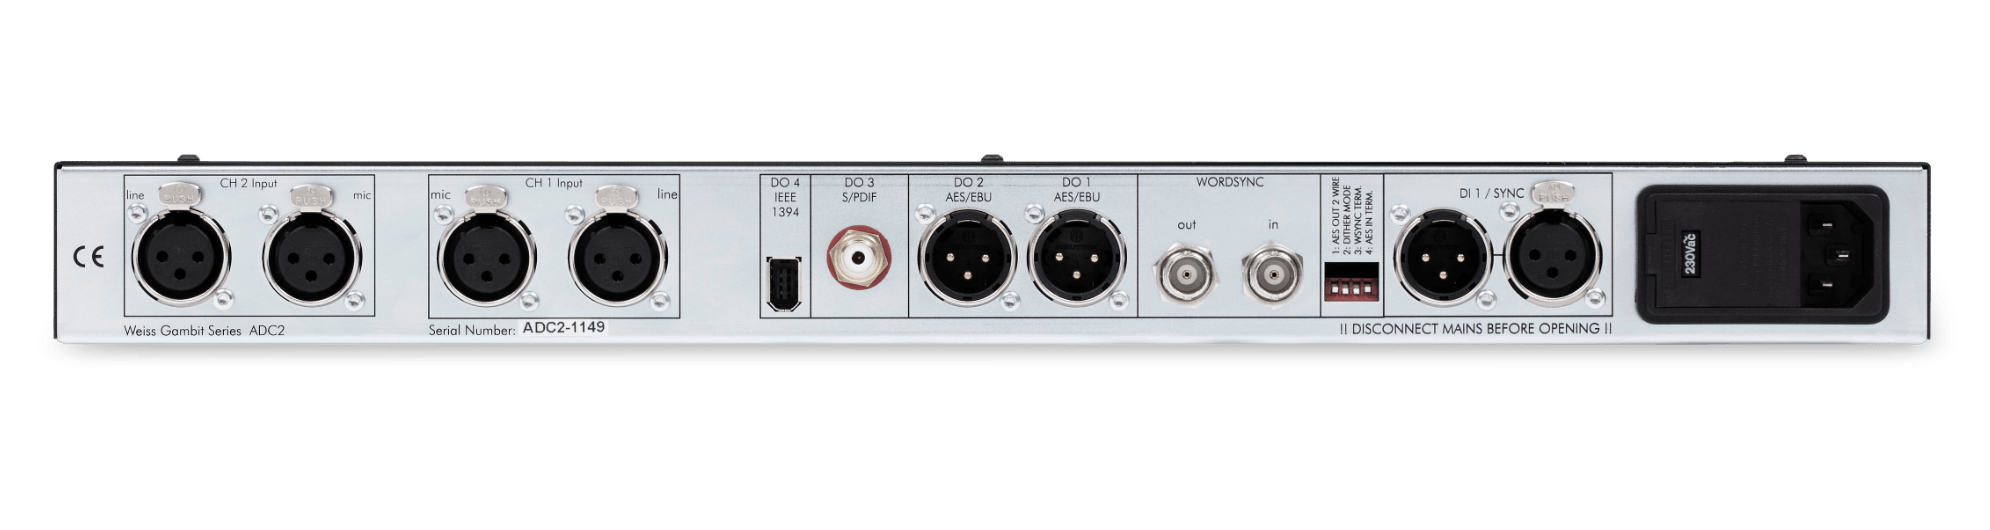 Weiss - Pro Audio - ADC2 - Rear